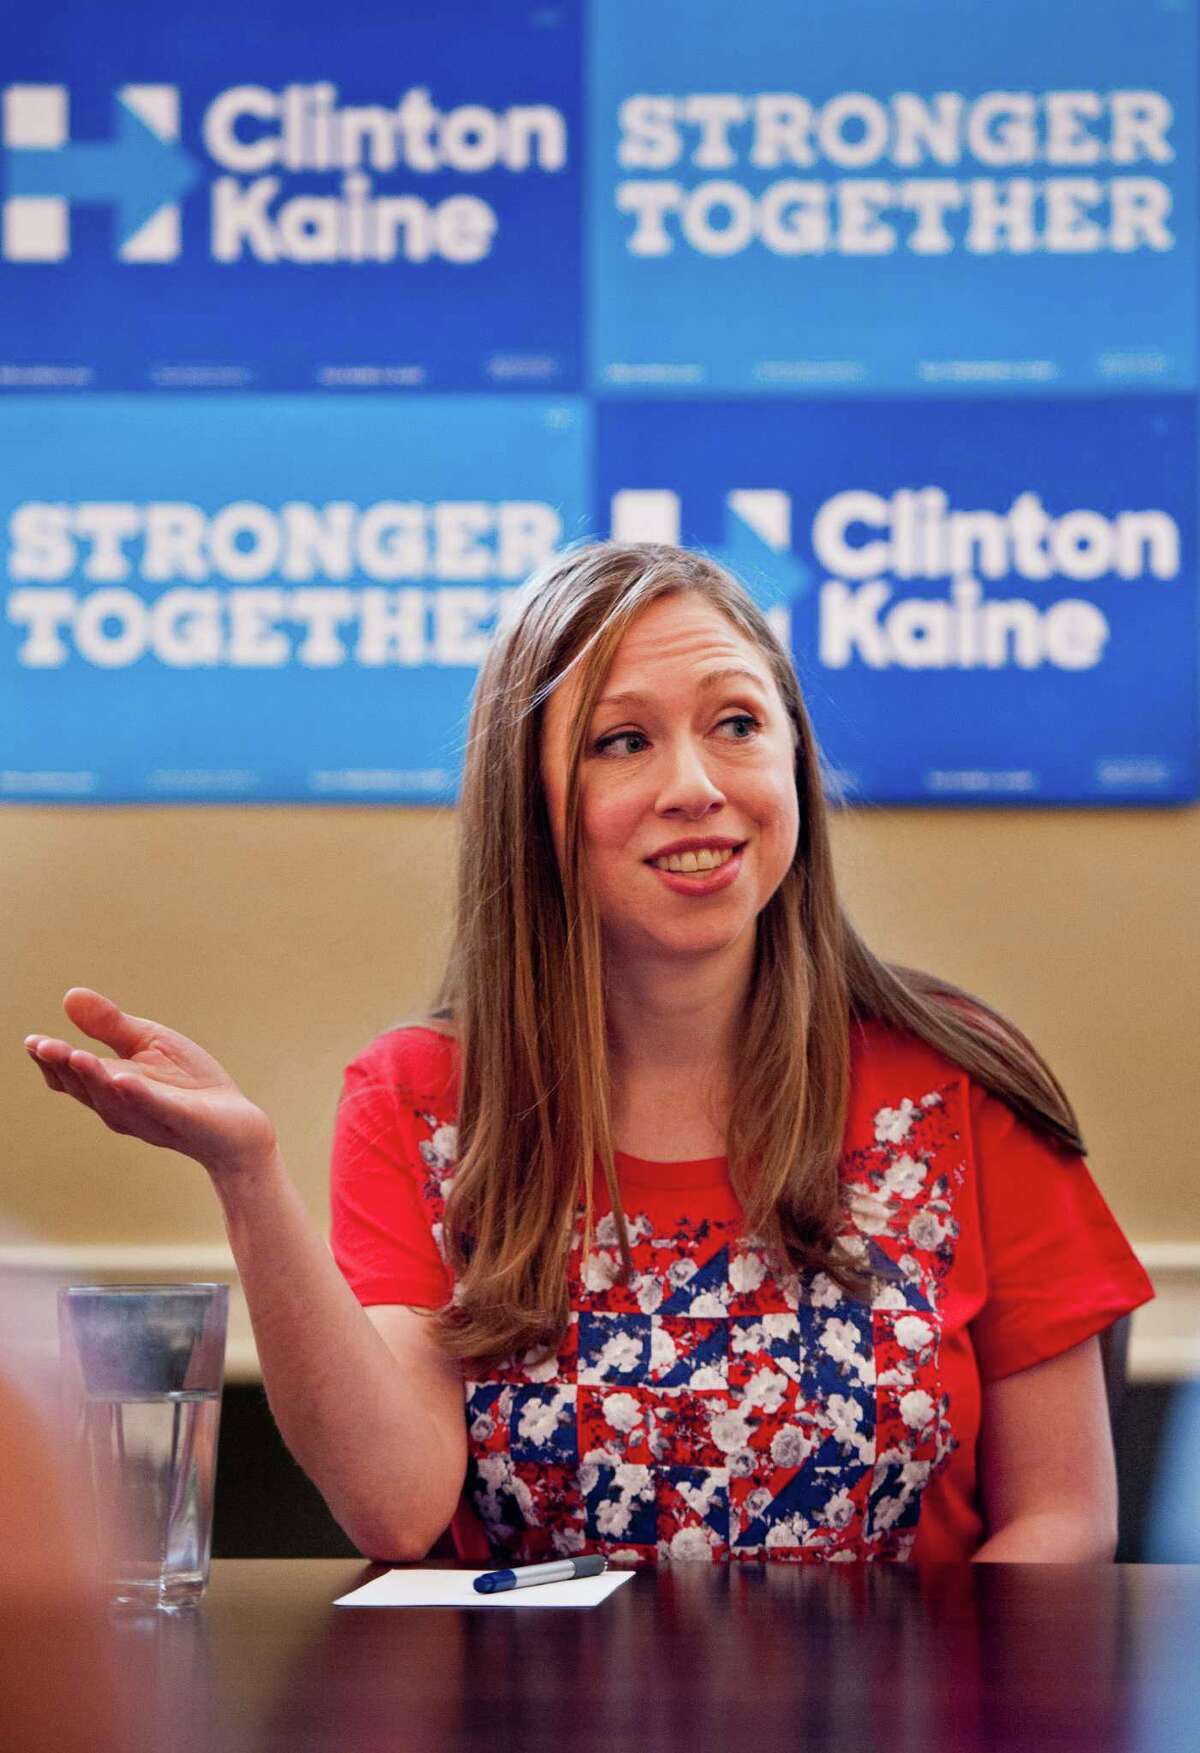 NORTH CAROLINA: Chelsea Clinton stumps for her mom in an important swing state.